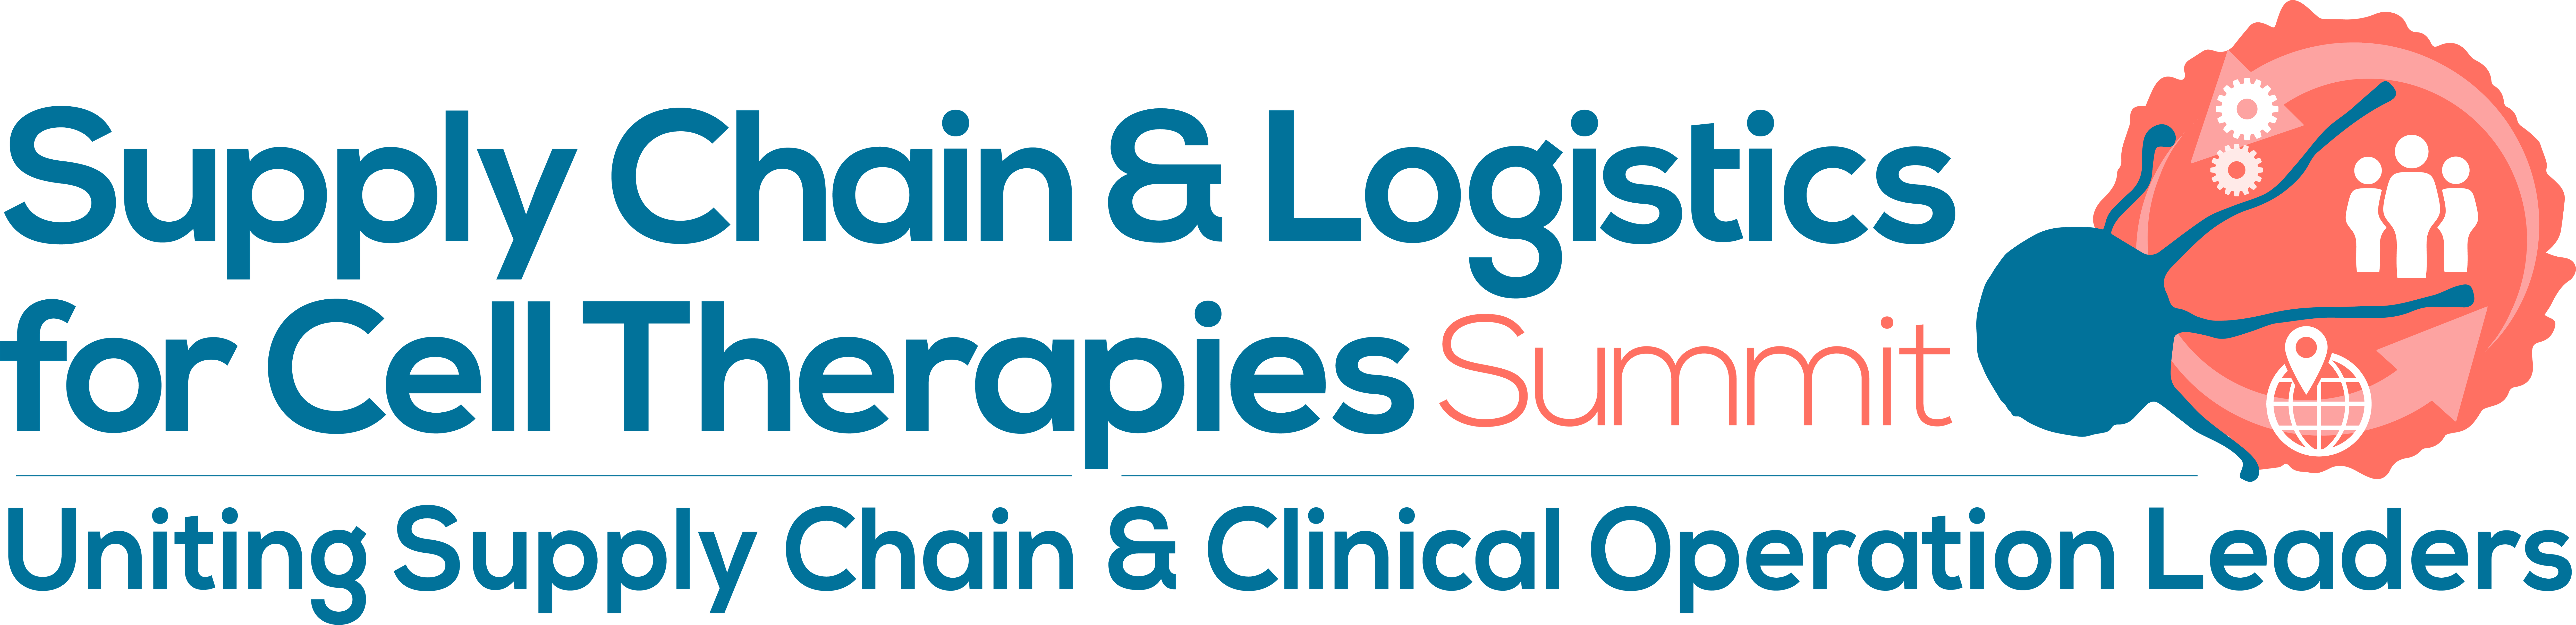 5th Supply Chain & Logistics for Cell Therapies Summit Logo